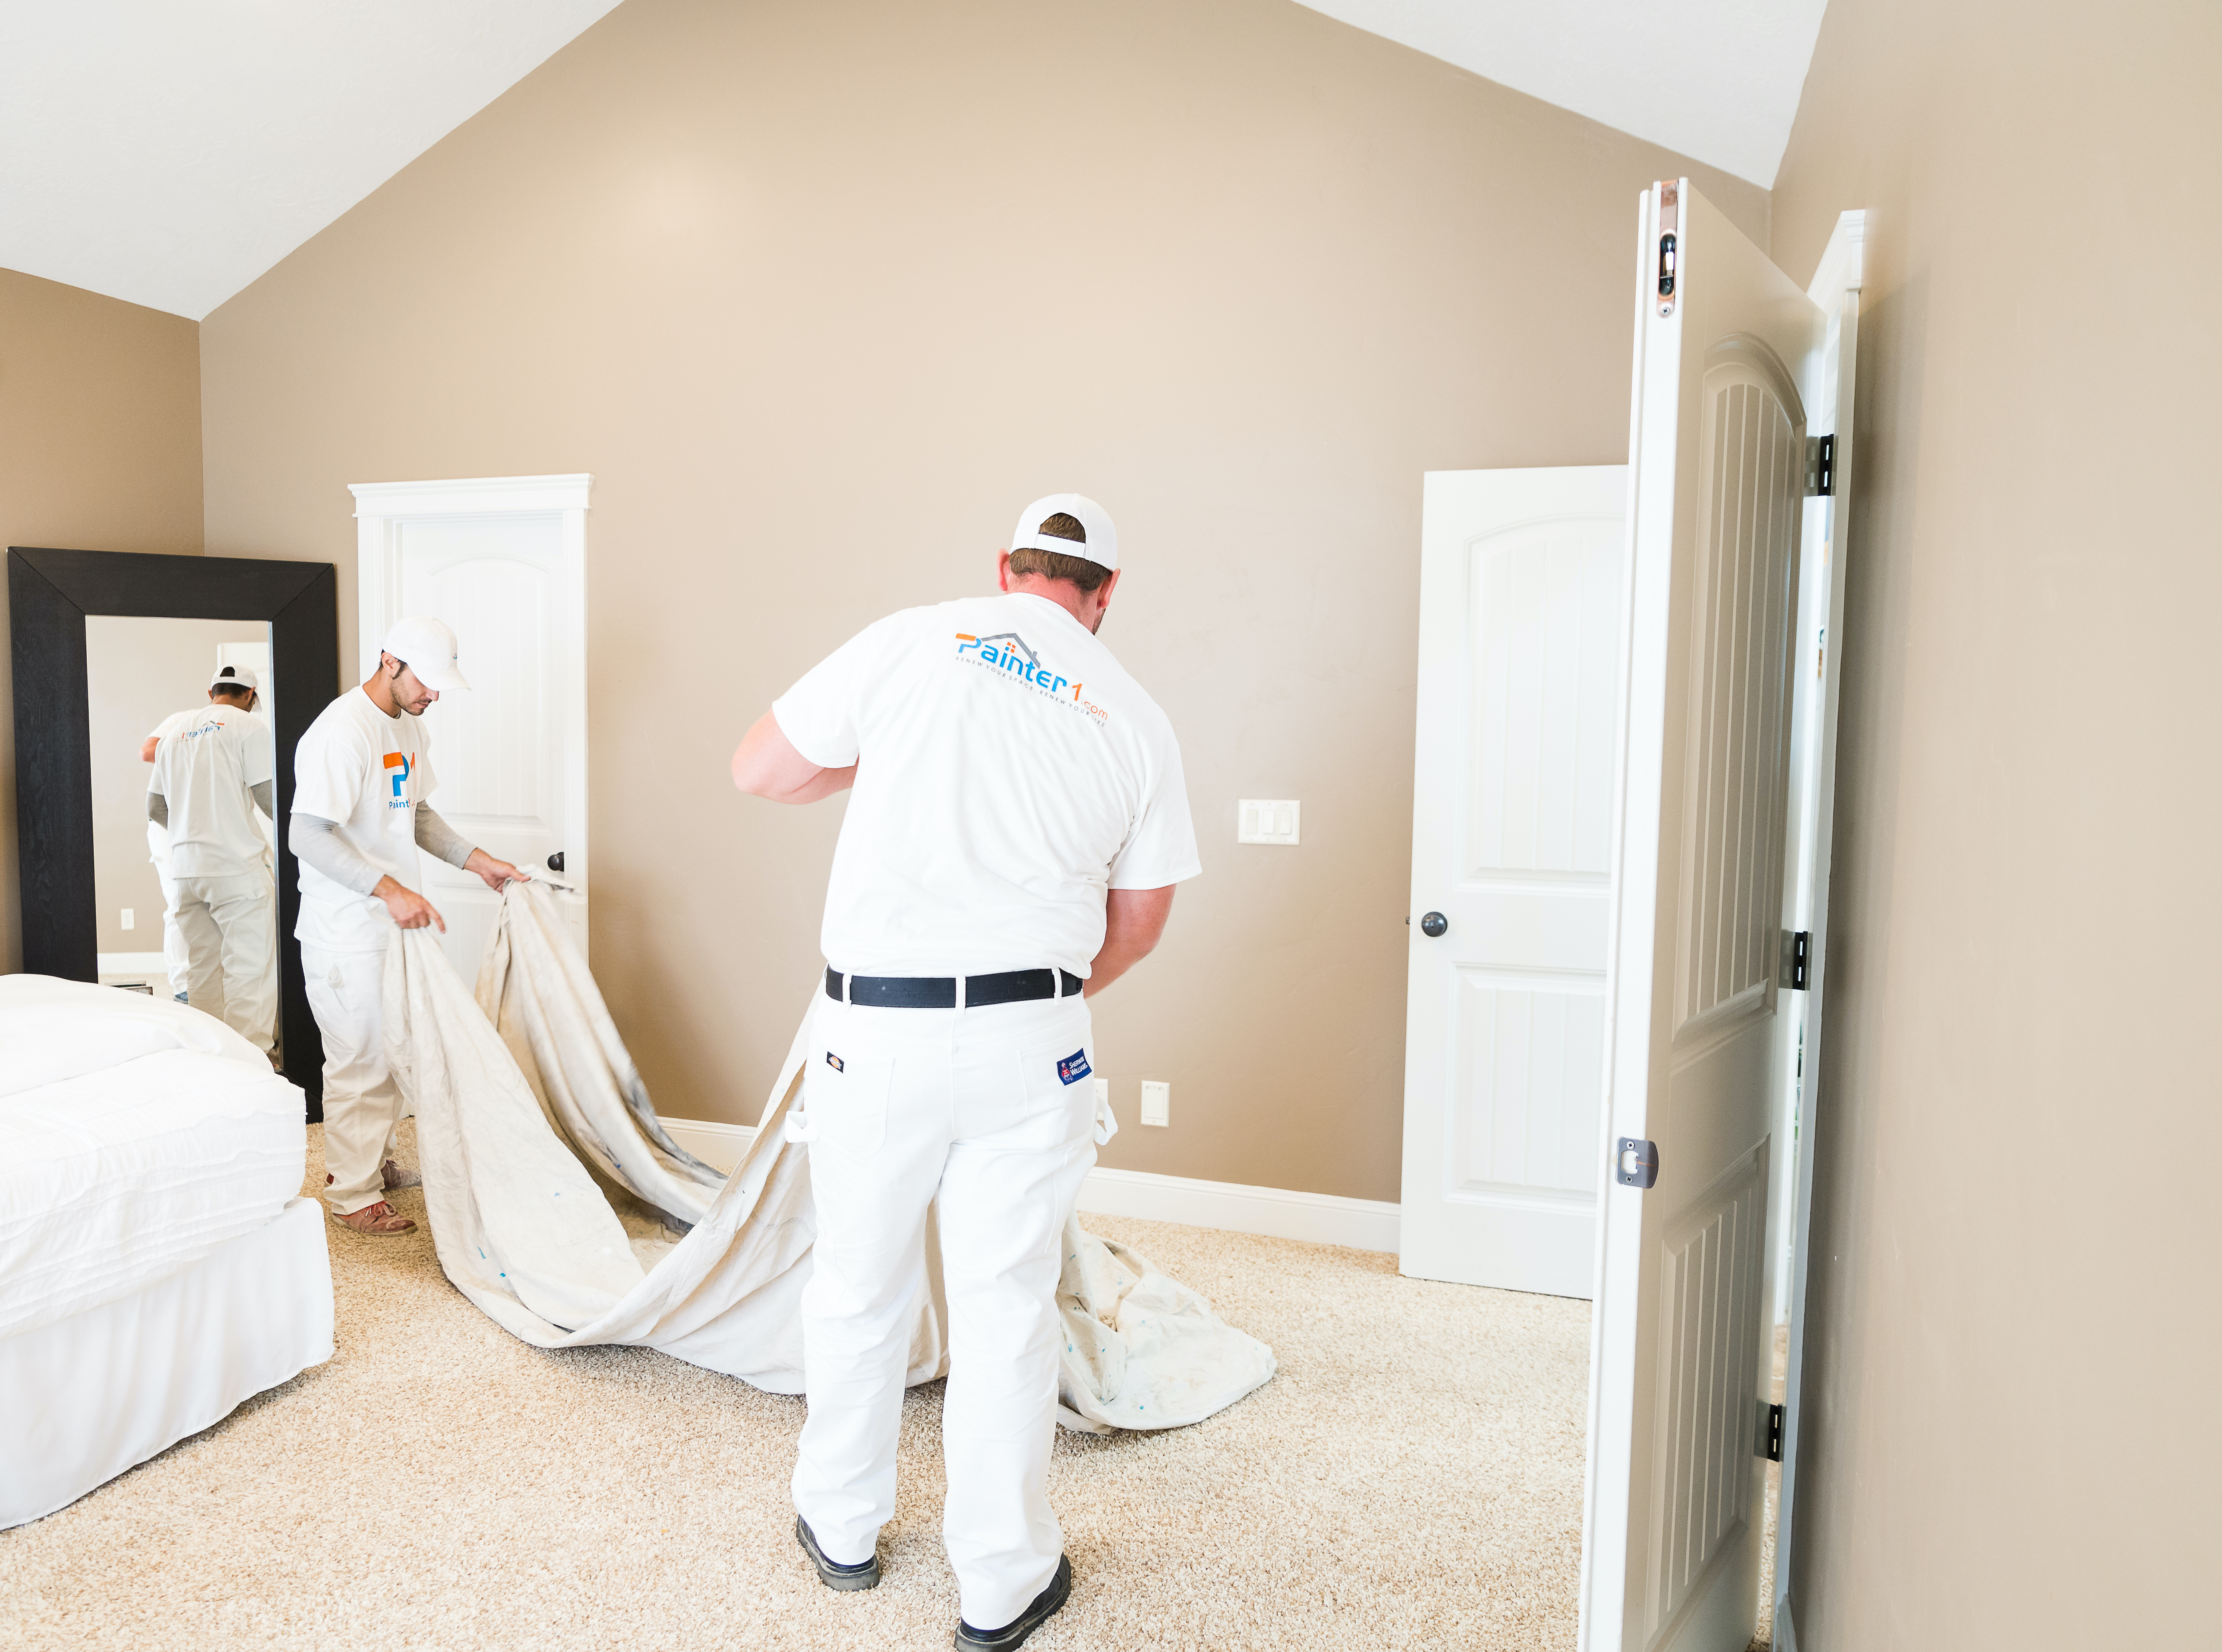 Painter1 of Chattanooga has top rated house painters in Chattanooga.